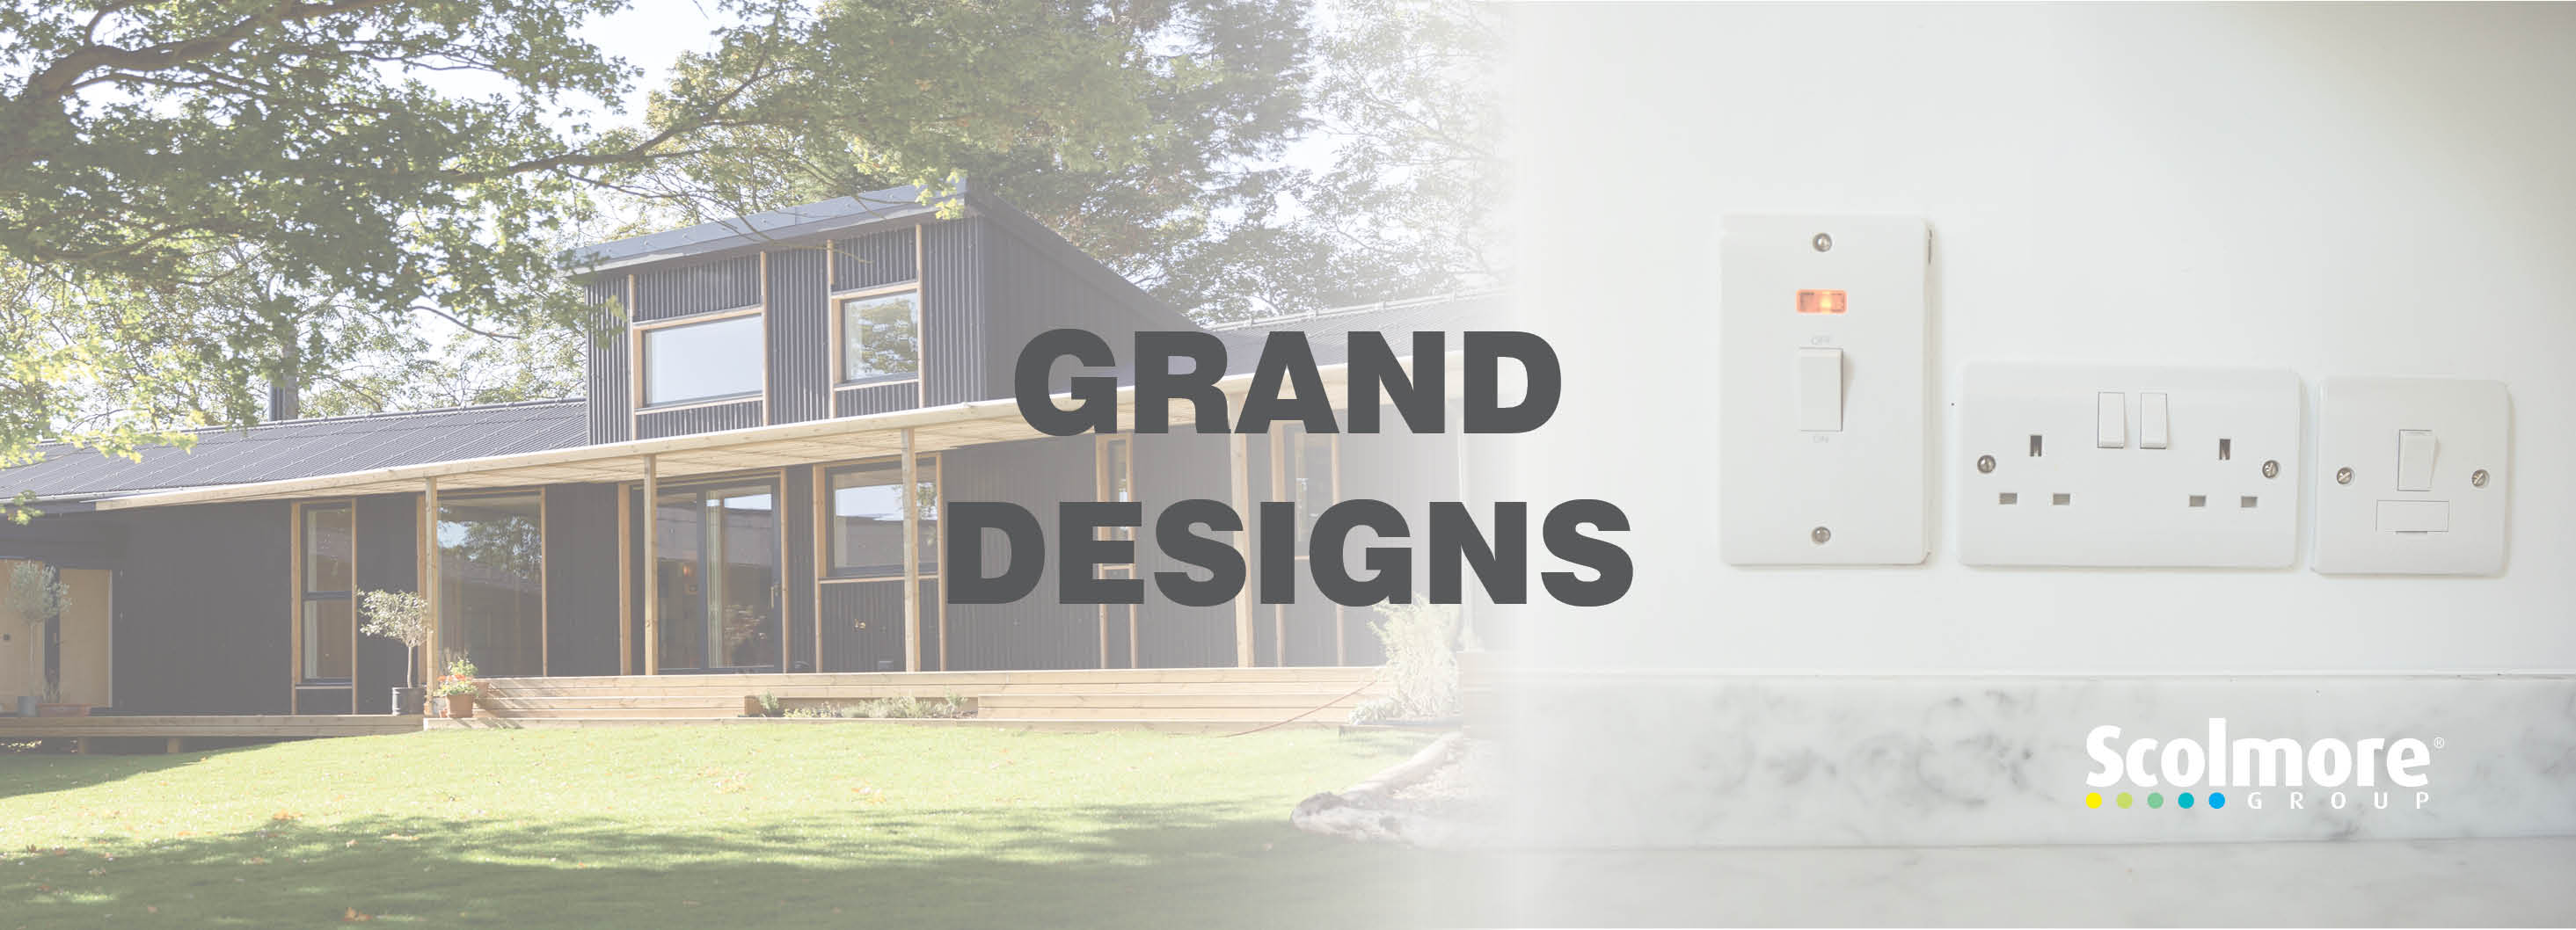 Mode provides a healthy solution for Grand Designs